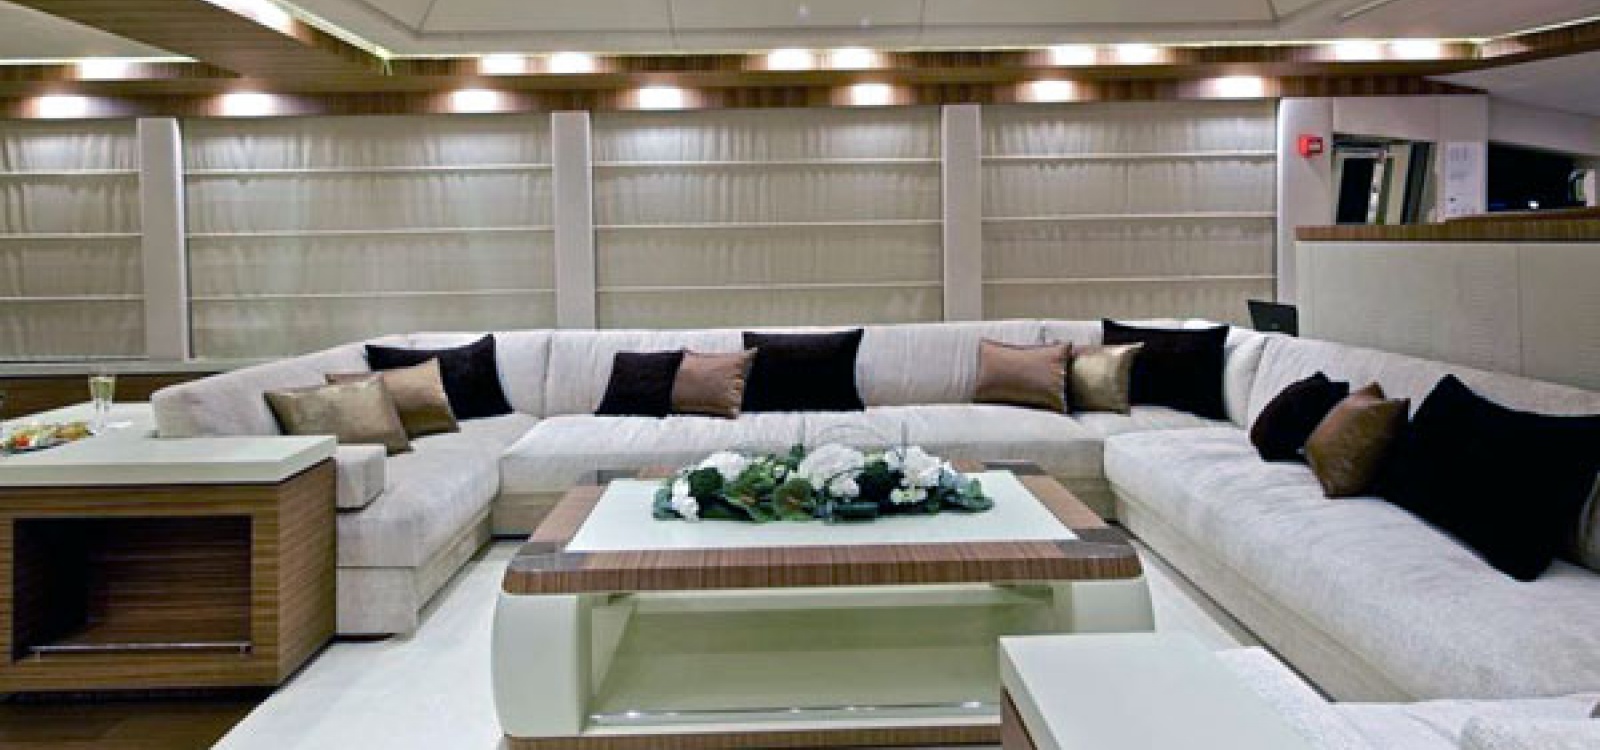 5 Rooms, Motor Yacht, For Charter, 8 Bathrooms, Listing ID 1042